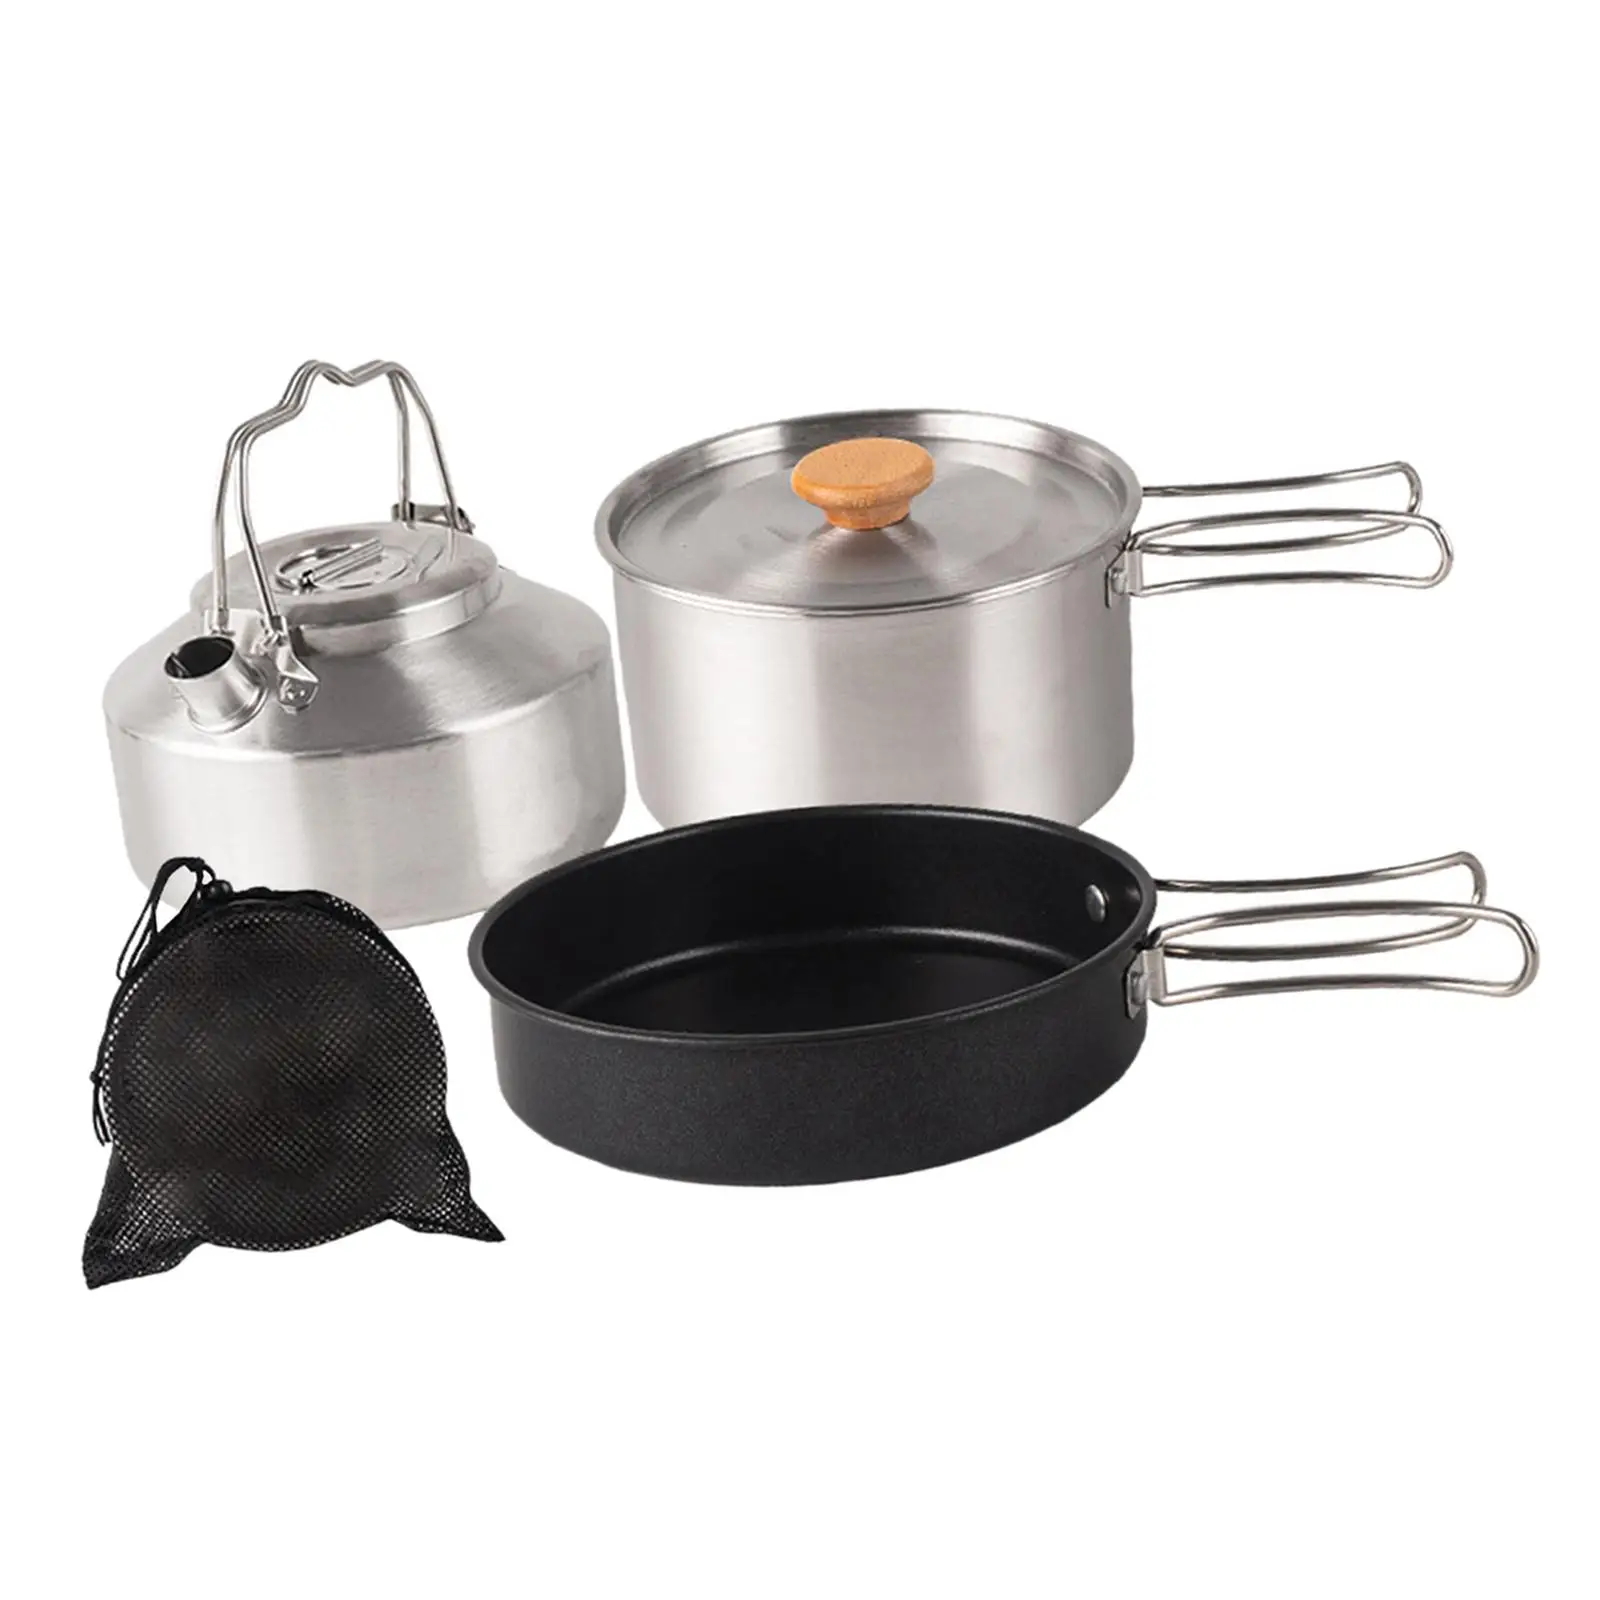 Camping Cookware Set, Outdoor Cook Gear with Storage Bag Stainless Steel Camping